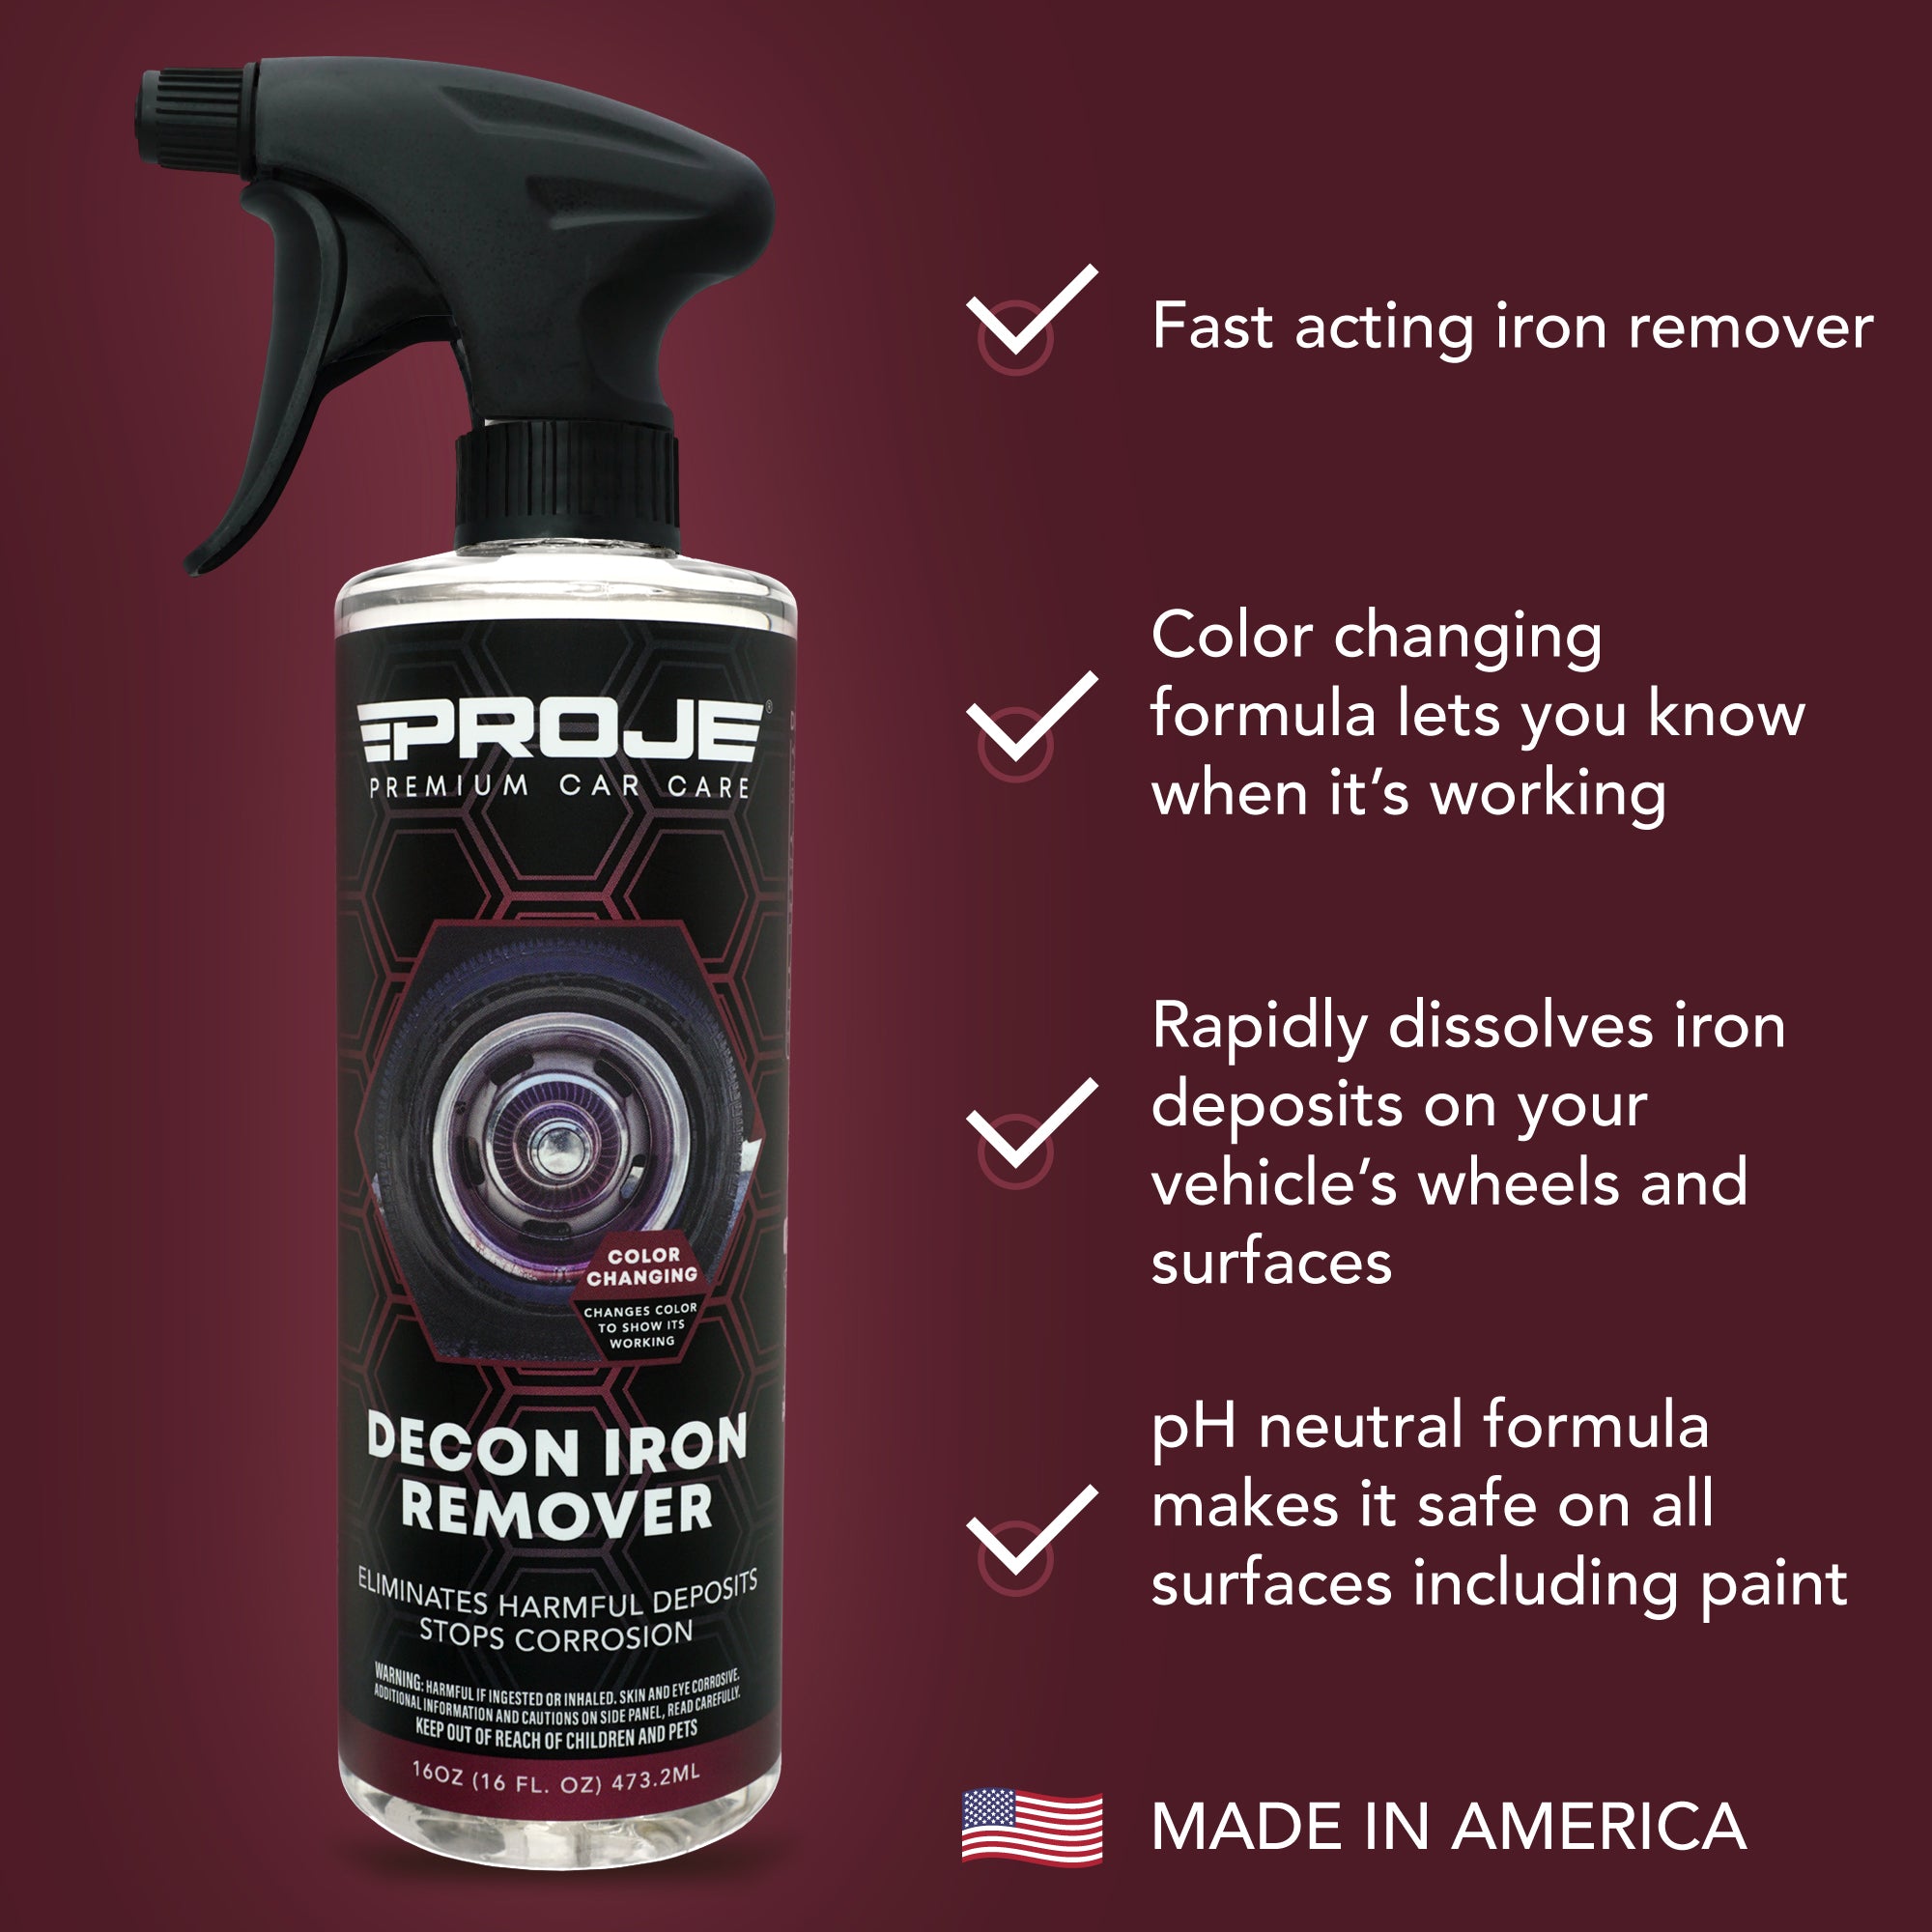  Swift Iron Remover & Wheel Cleaner (16 Oz) – Remove Brake Dust,  Iron Oxide & Stuck-On Dirt & Debris from Paint & Wheels, Effective Formula  for Decon Car Wash